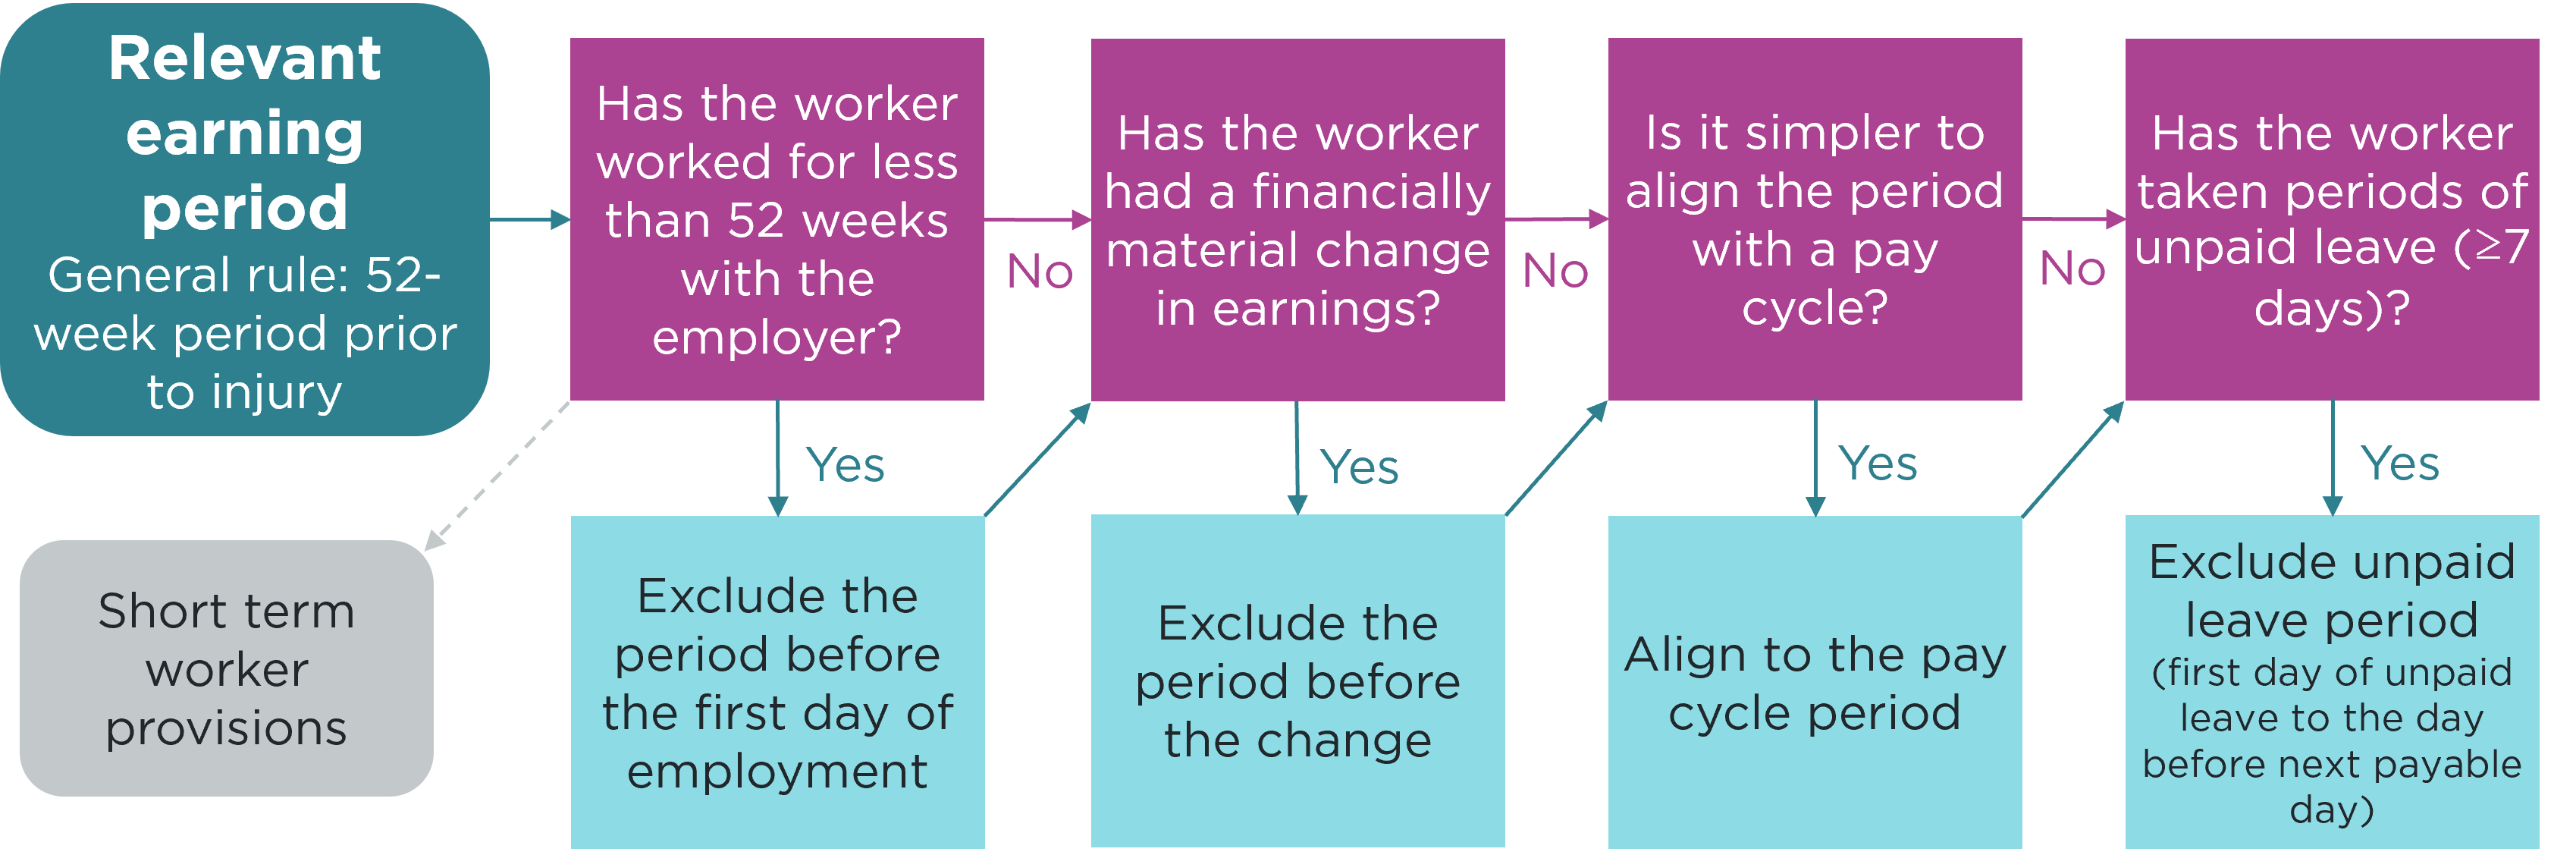 The relevant earning period workflow summarises each of the circumstances during the 52 weeks before a worker’s date of injury which may adjust the relevant earning period. 